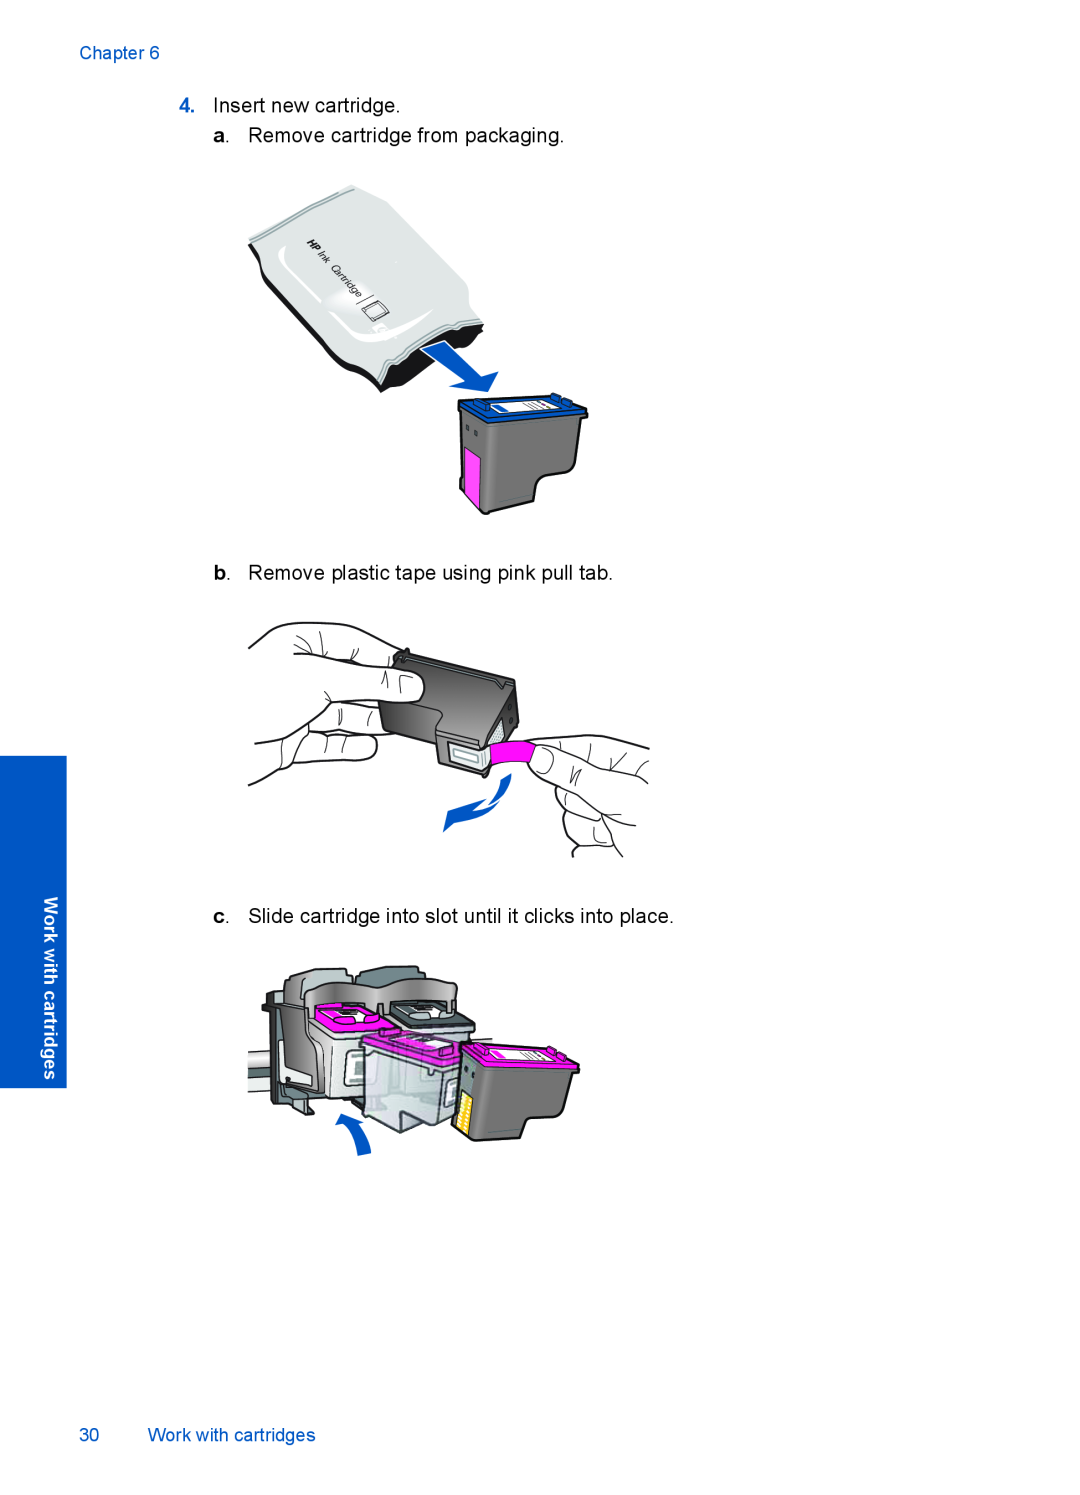 HP 1051 manual Insert new cartridge a. Remove cartridge from packaging, b. Remove plastic tape using pink pull tab, Chapter 